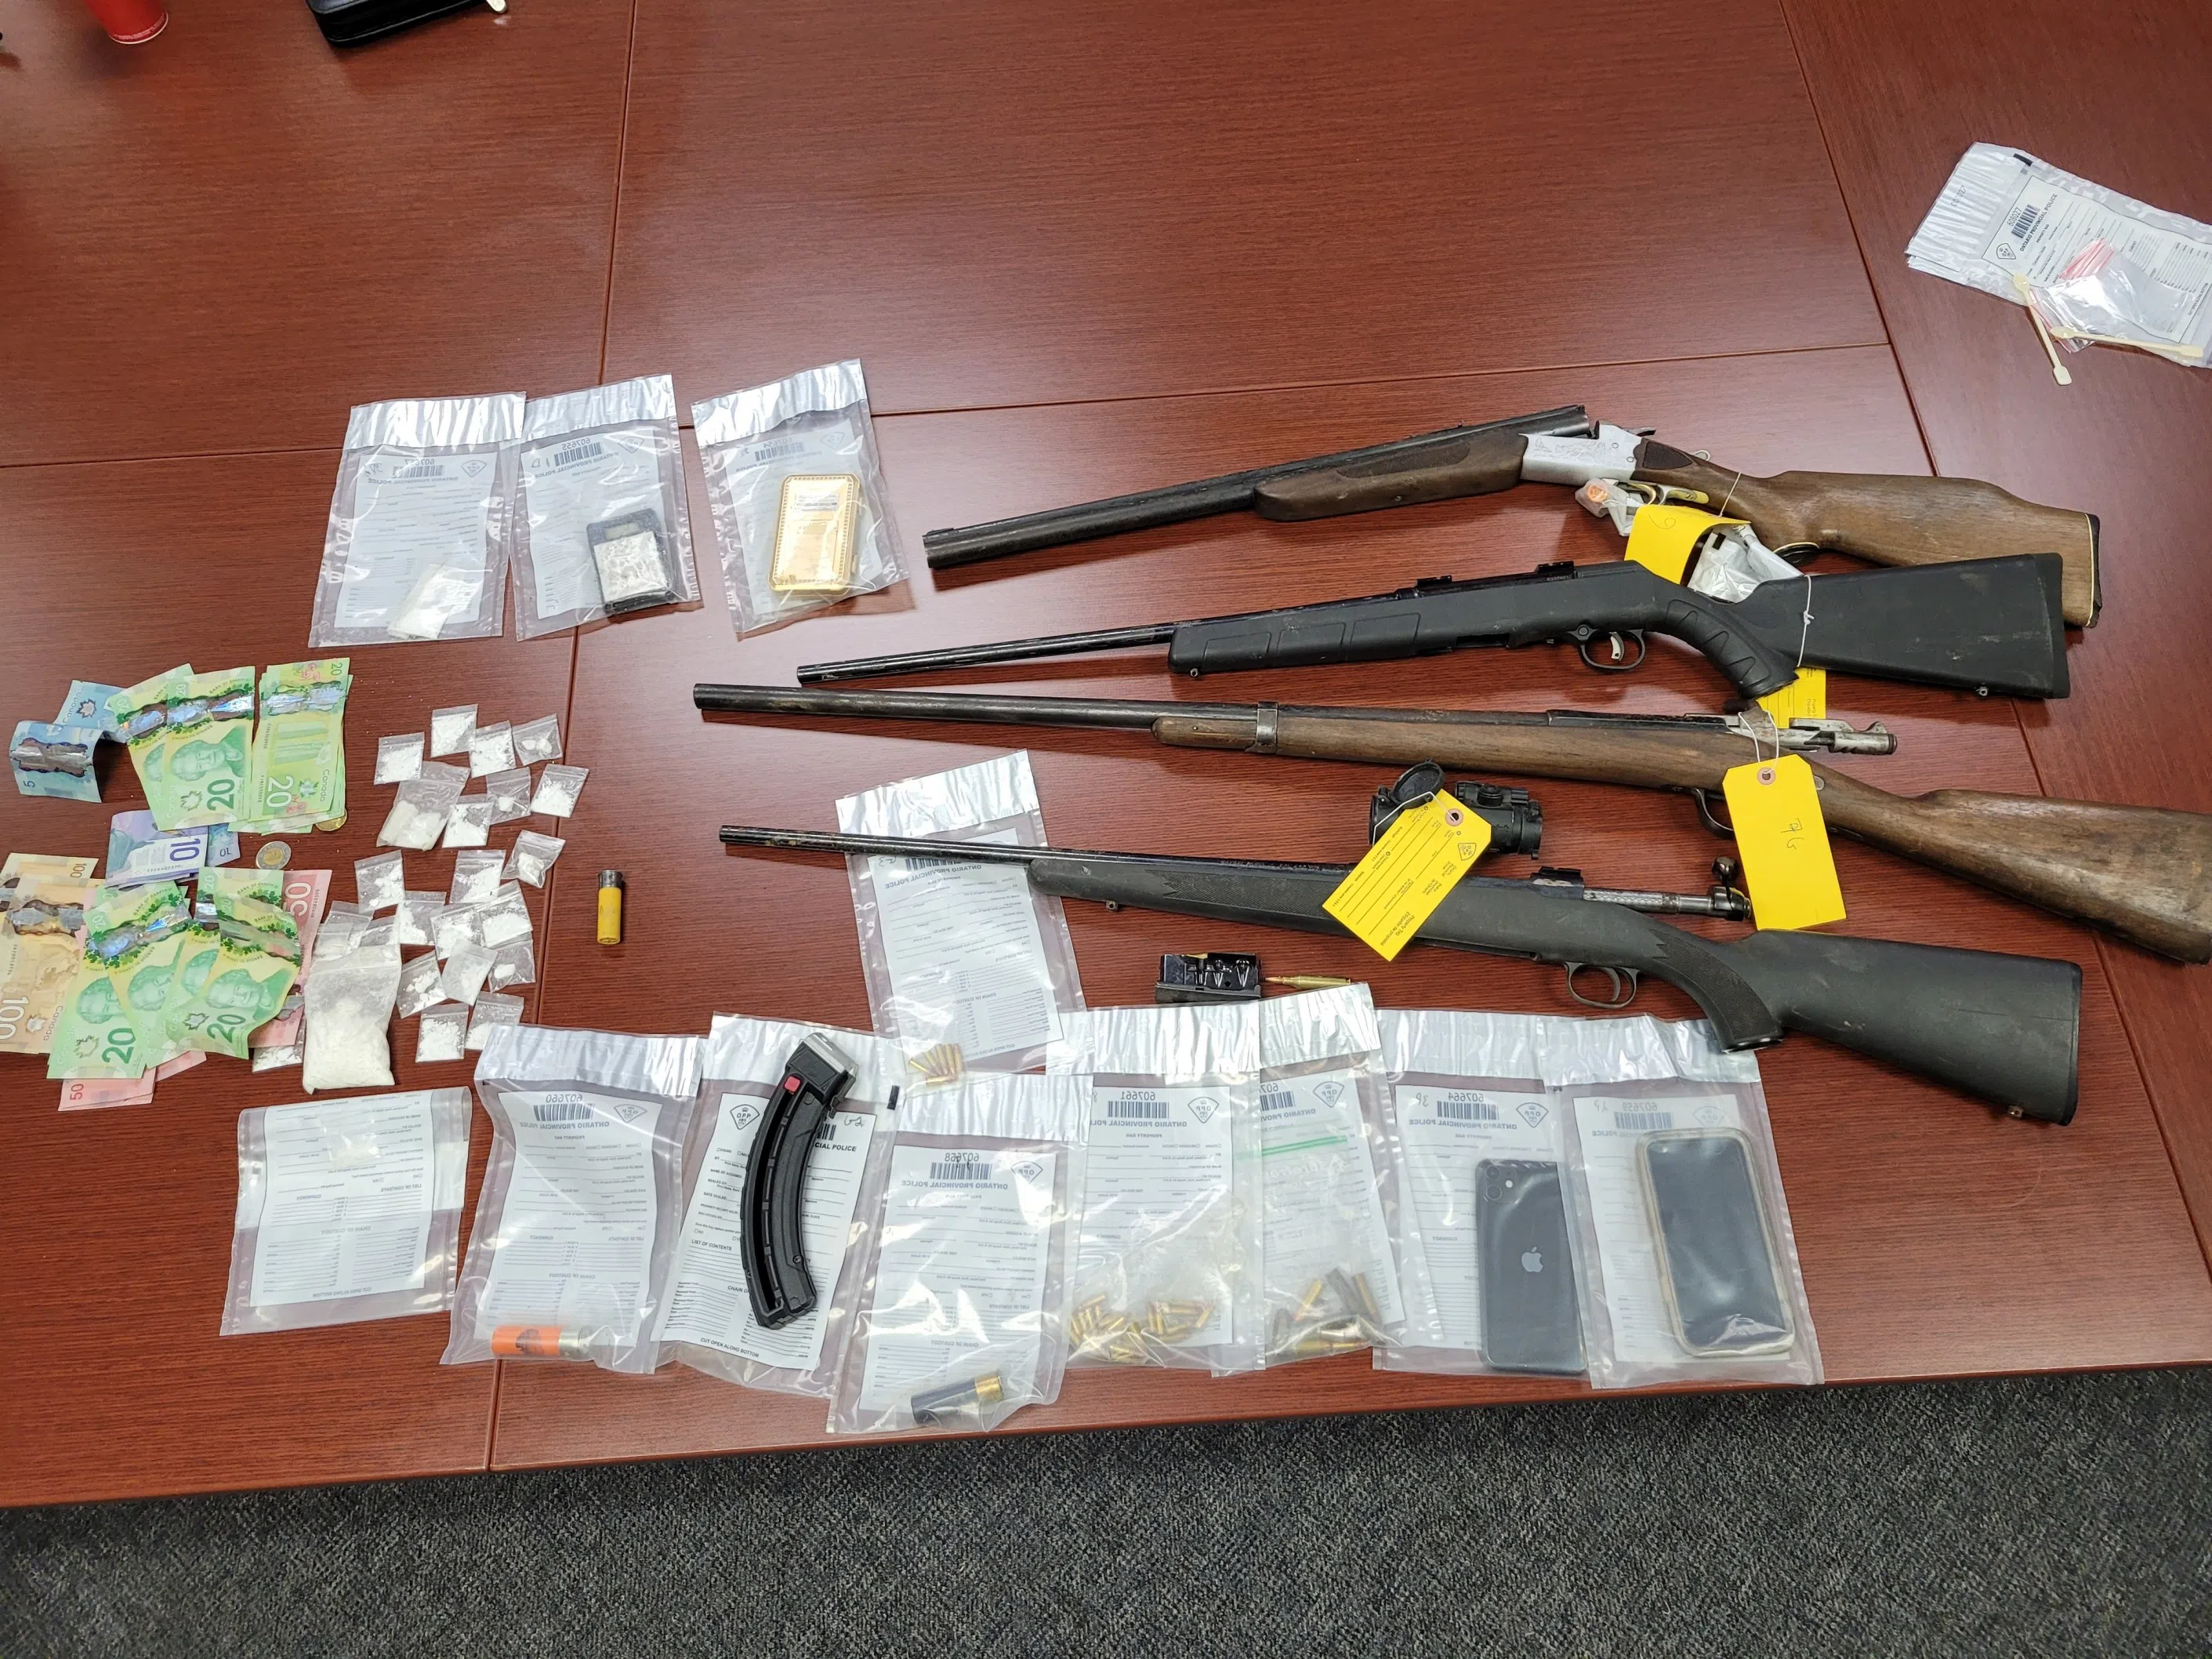 Drug and weapons charges in The County